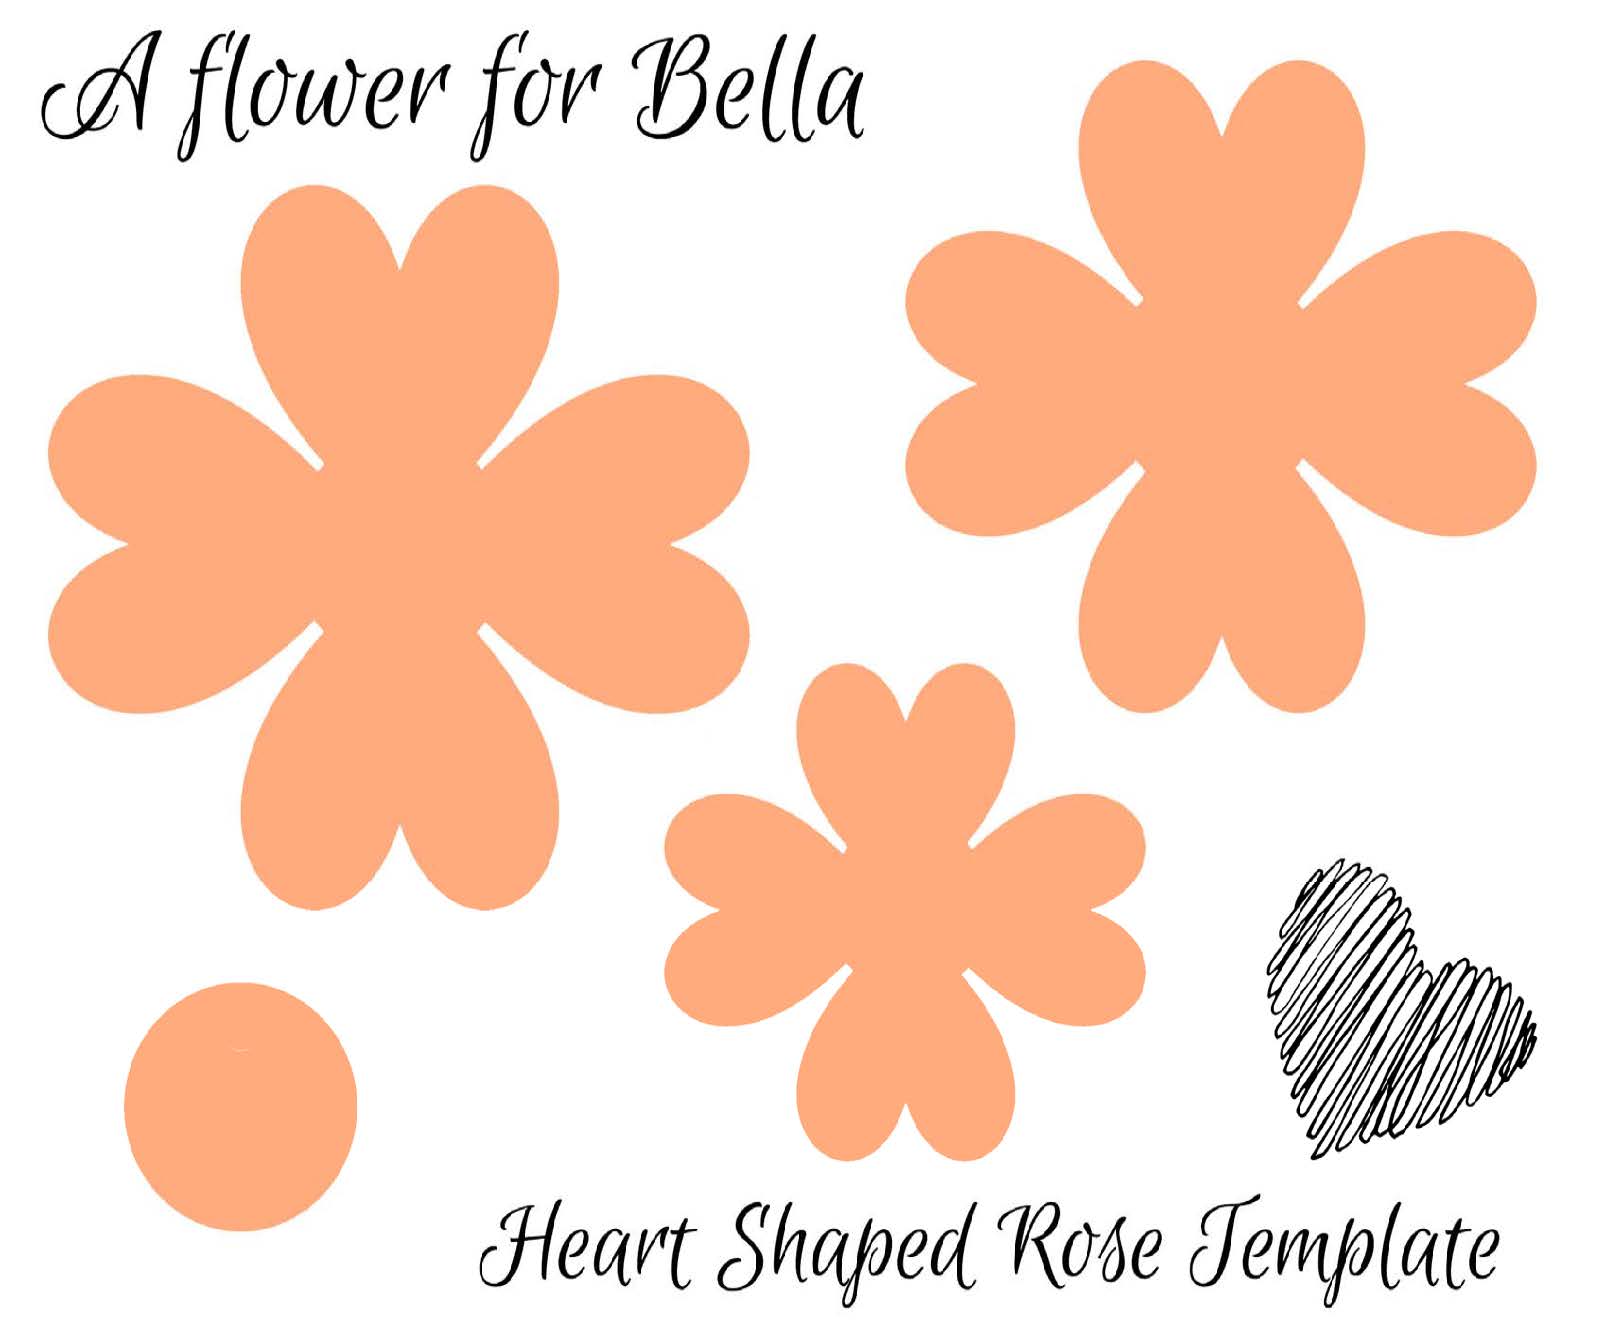 Heart Shaped Rose Template Download Beacon Converters